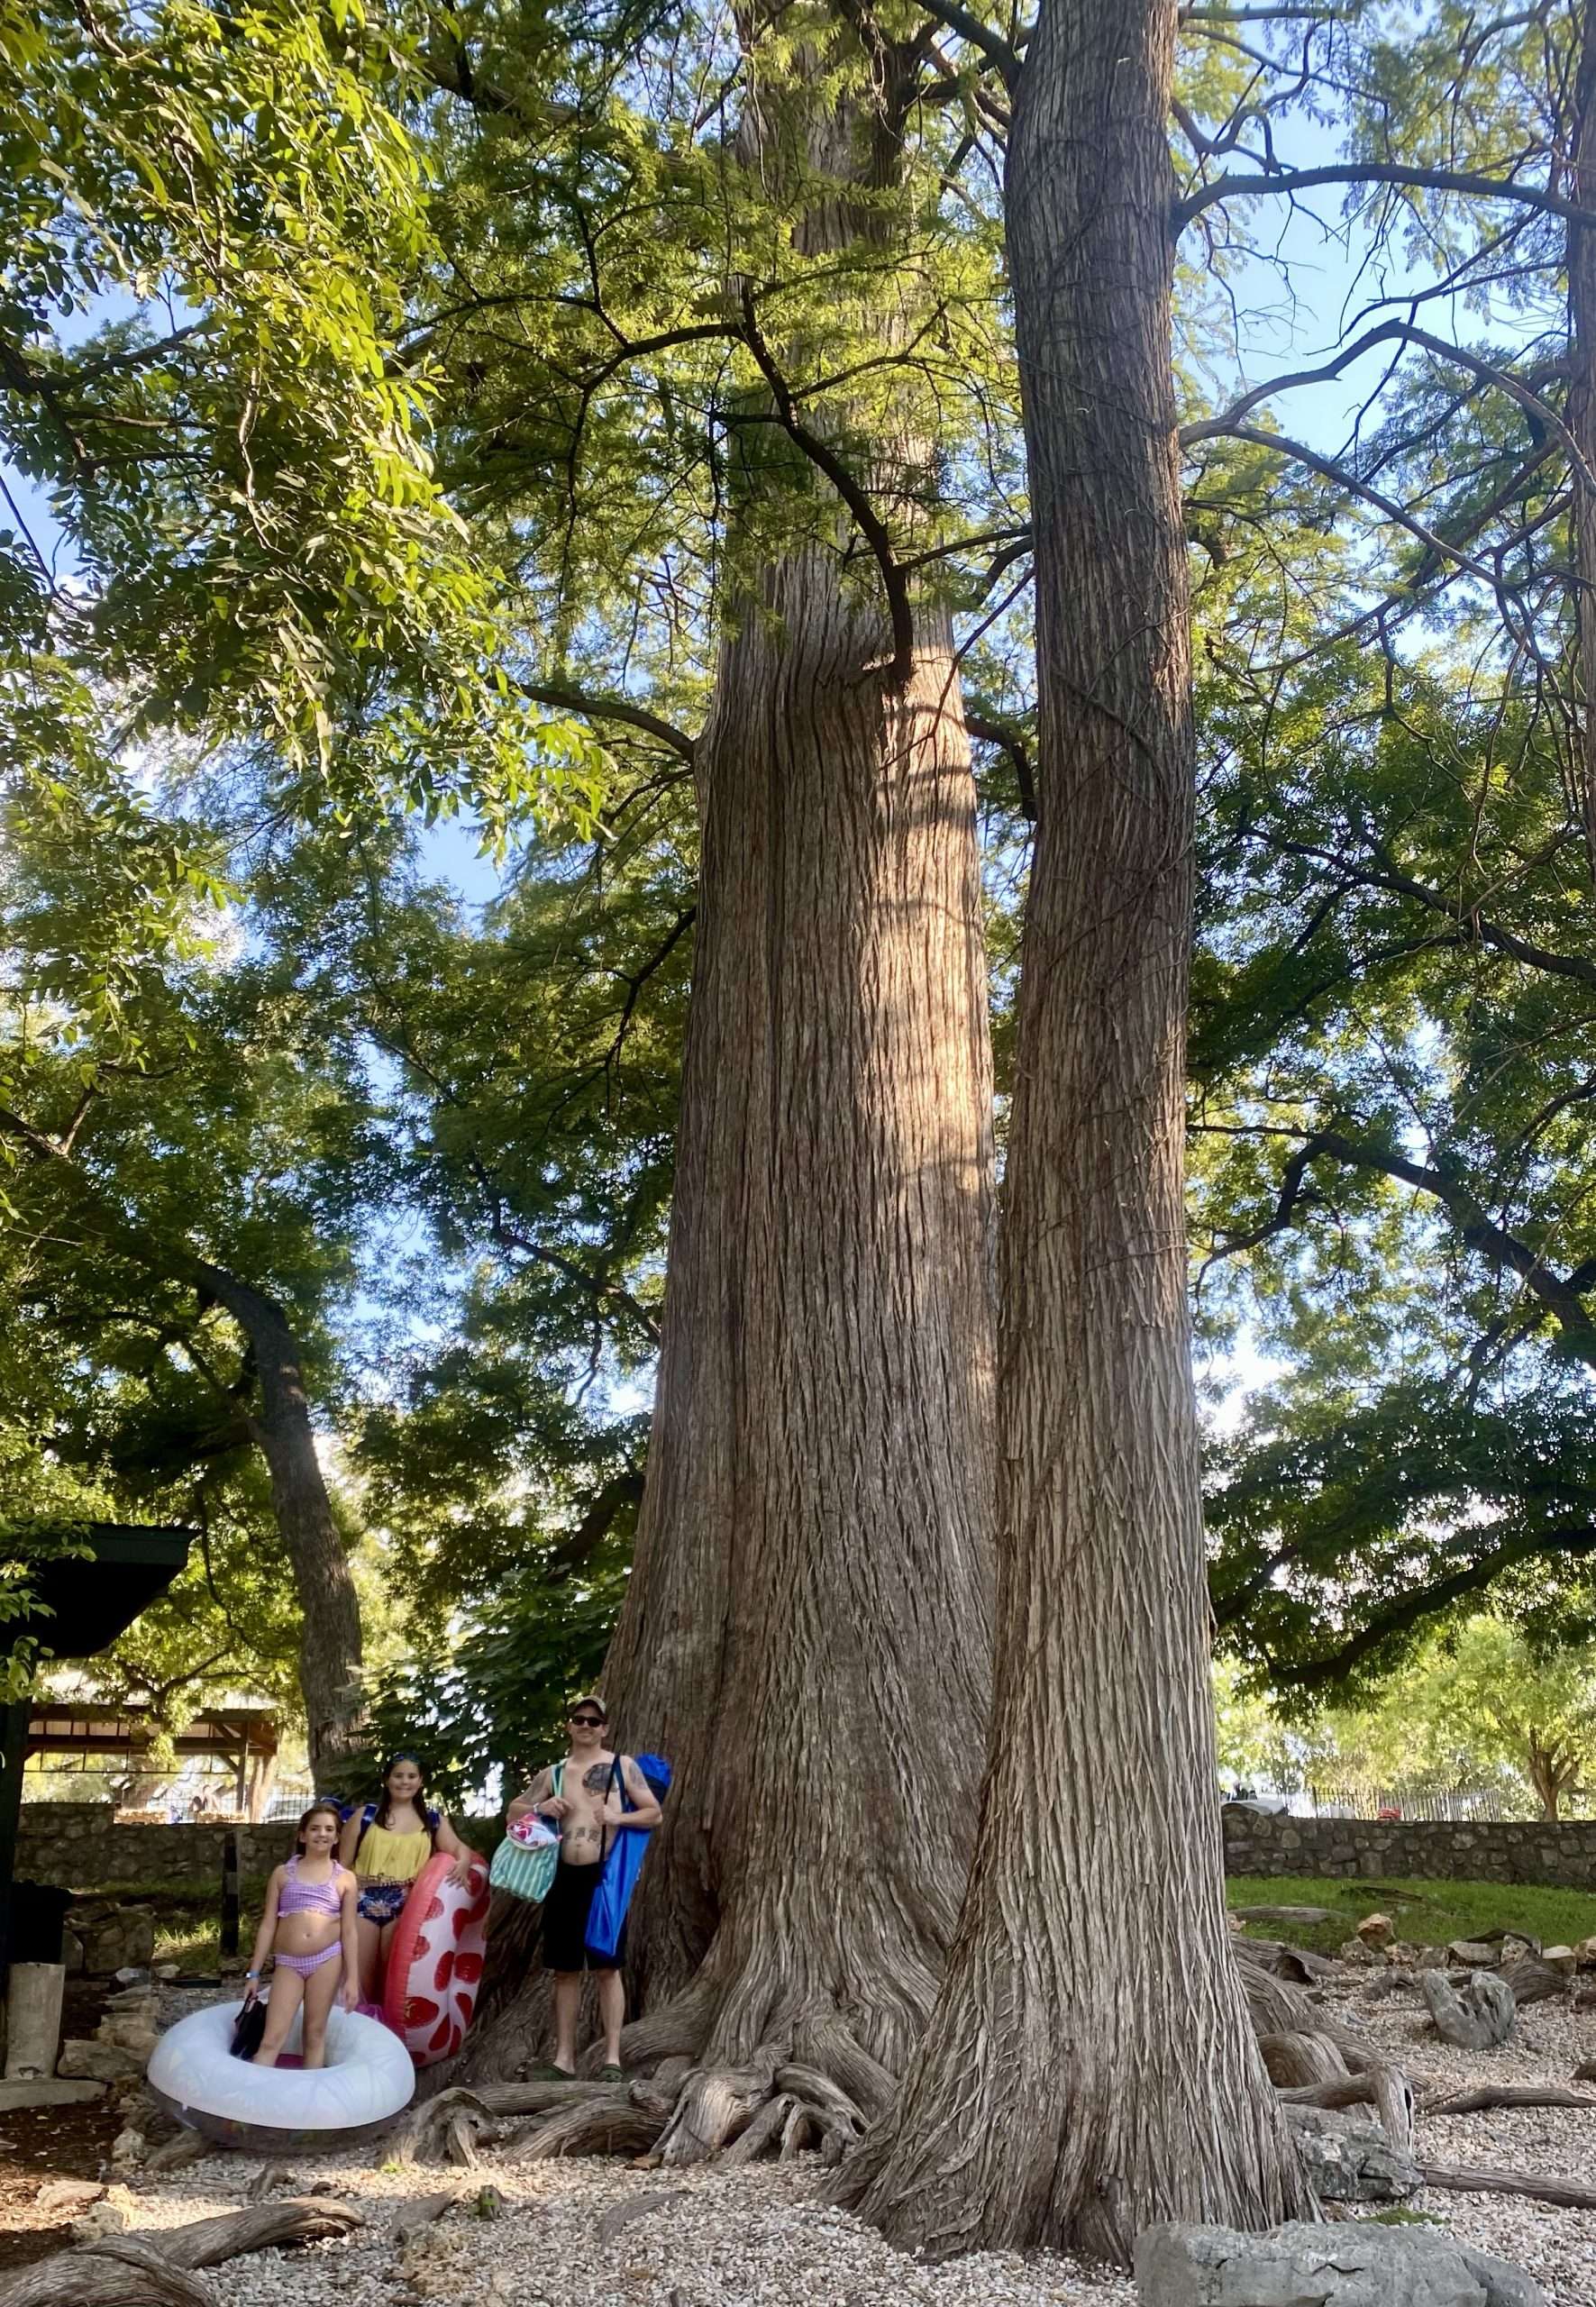 Family among the giant cypress trees at Krause Springs.